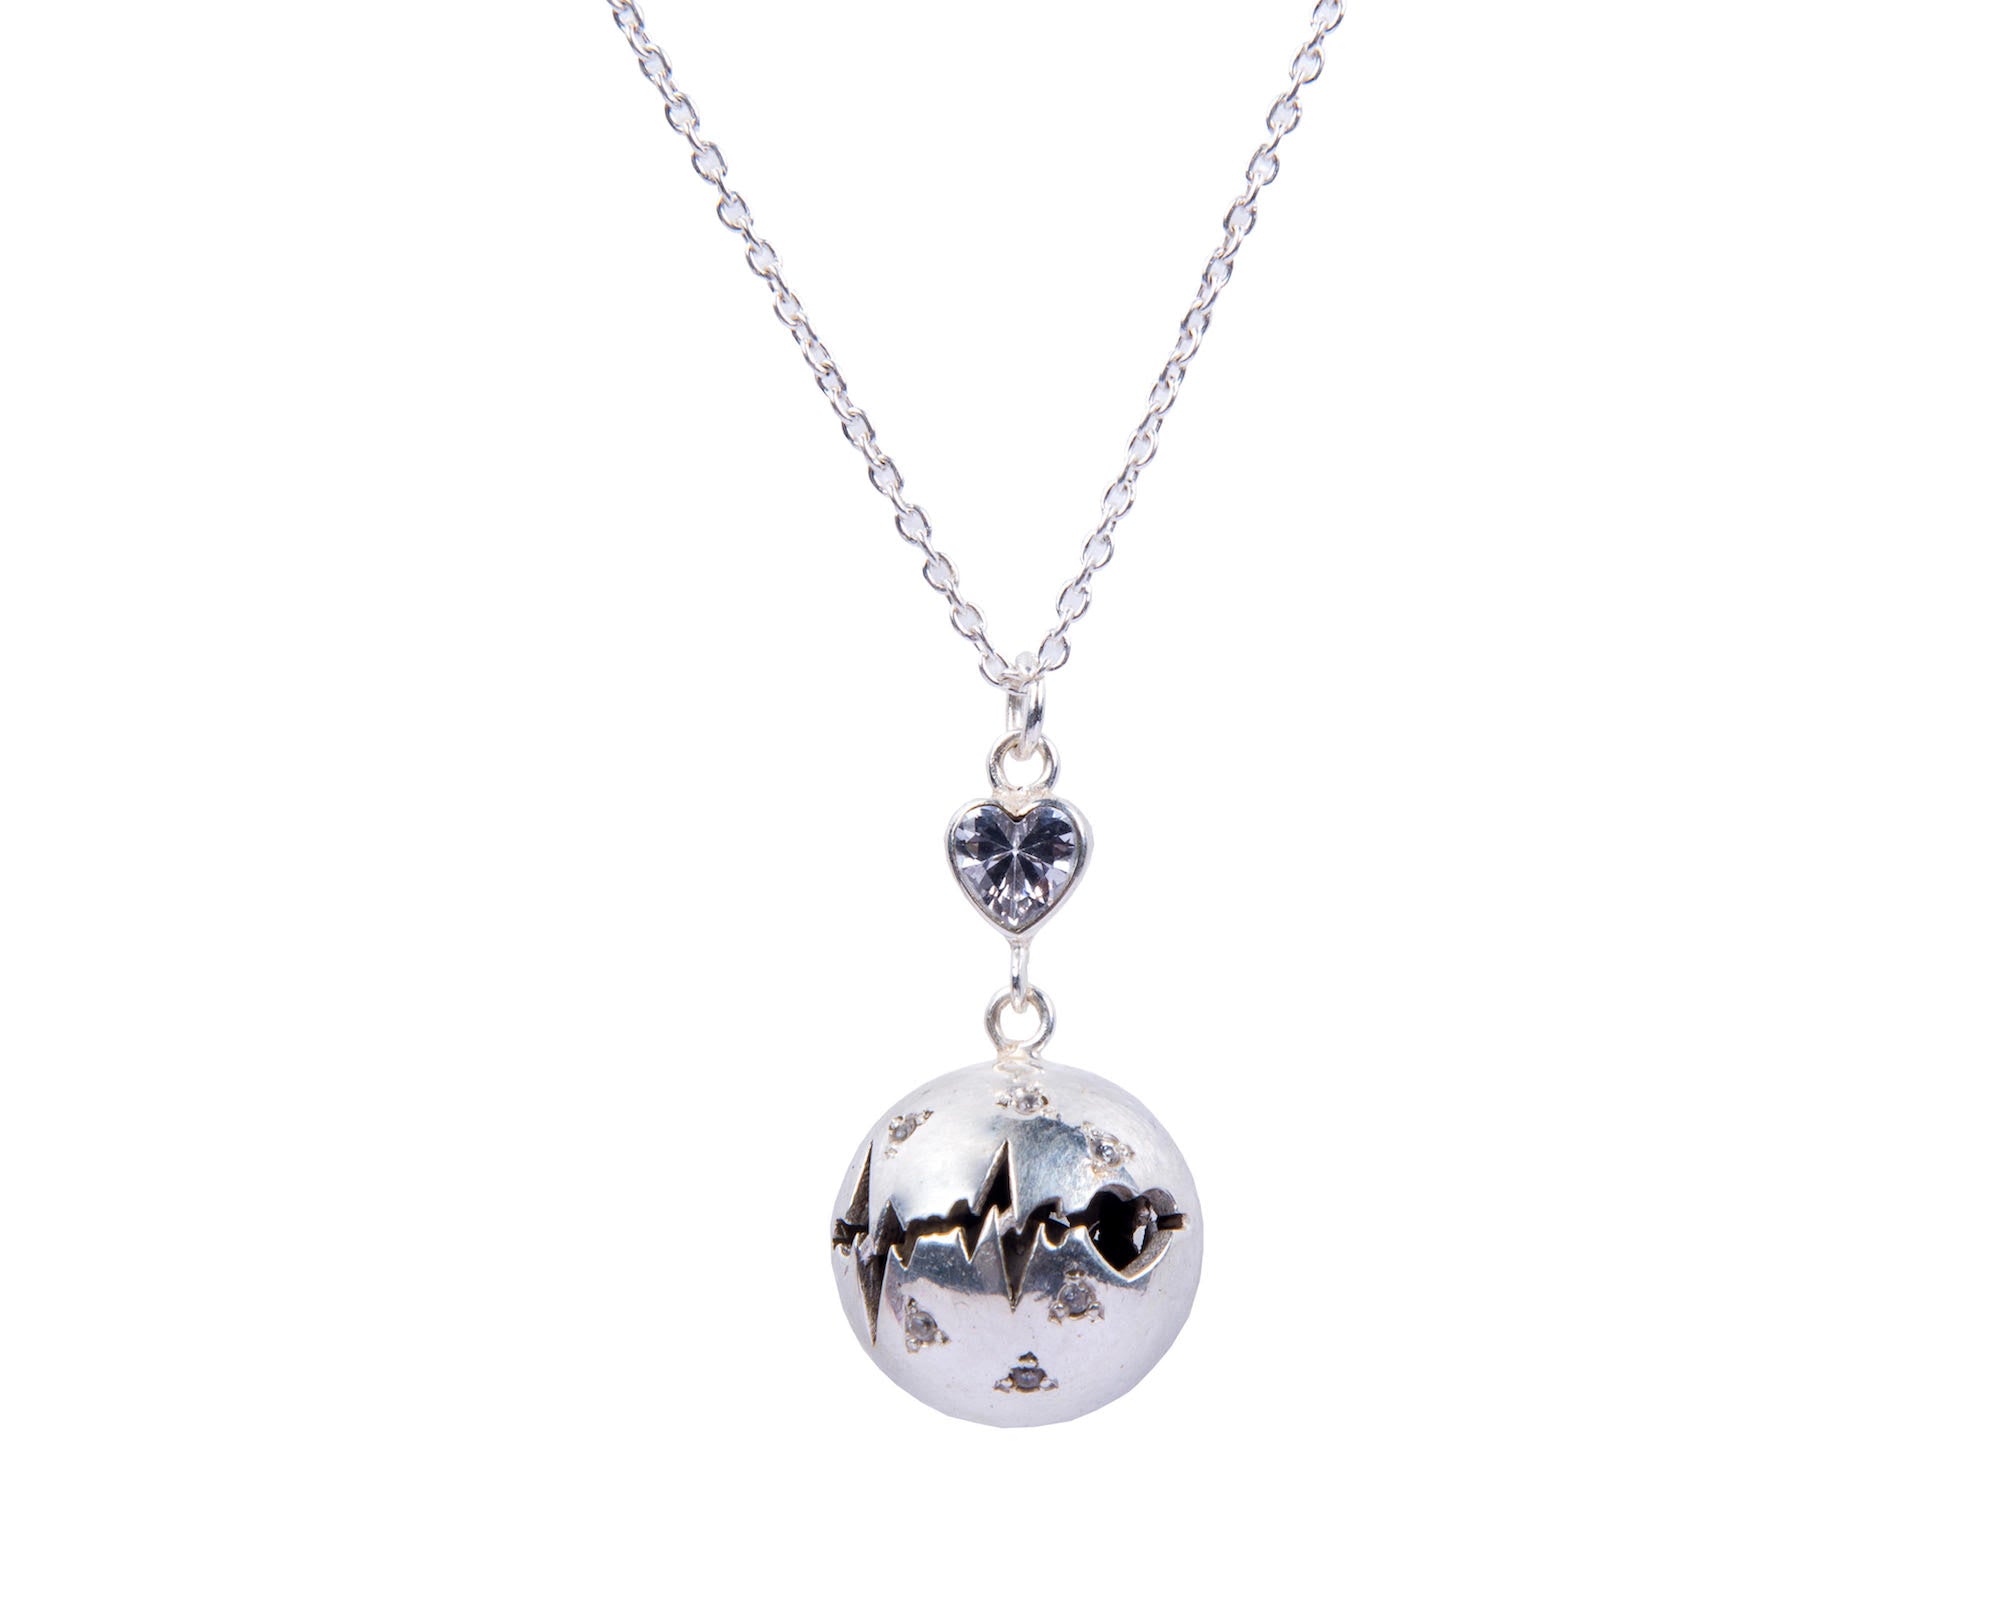 Harmony ball pendant with heart & heartbeat etching